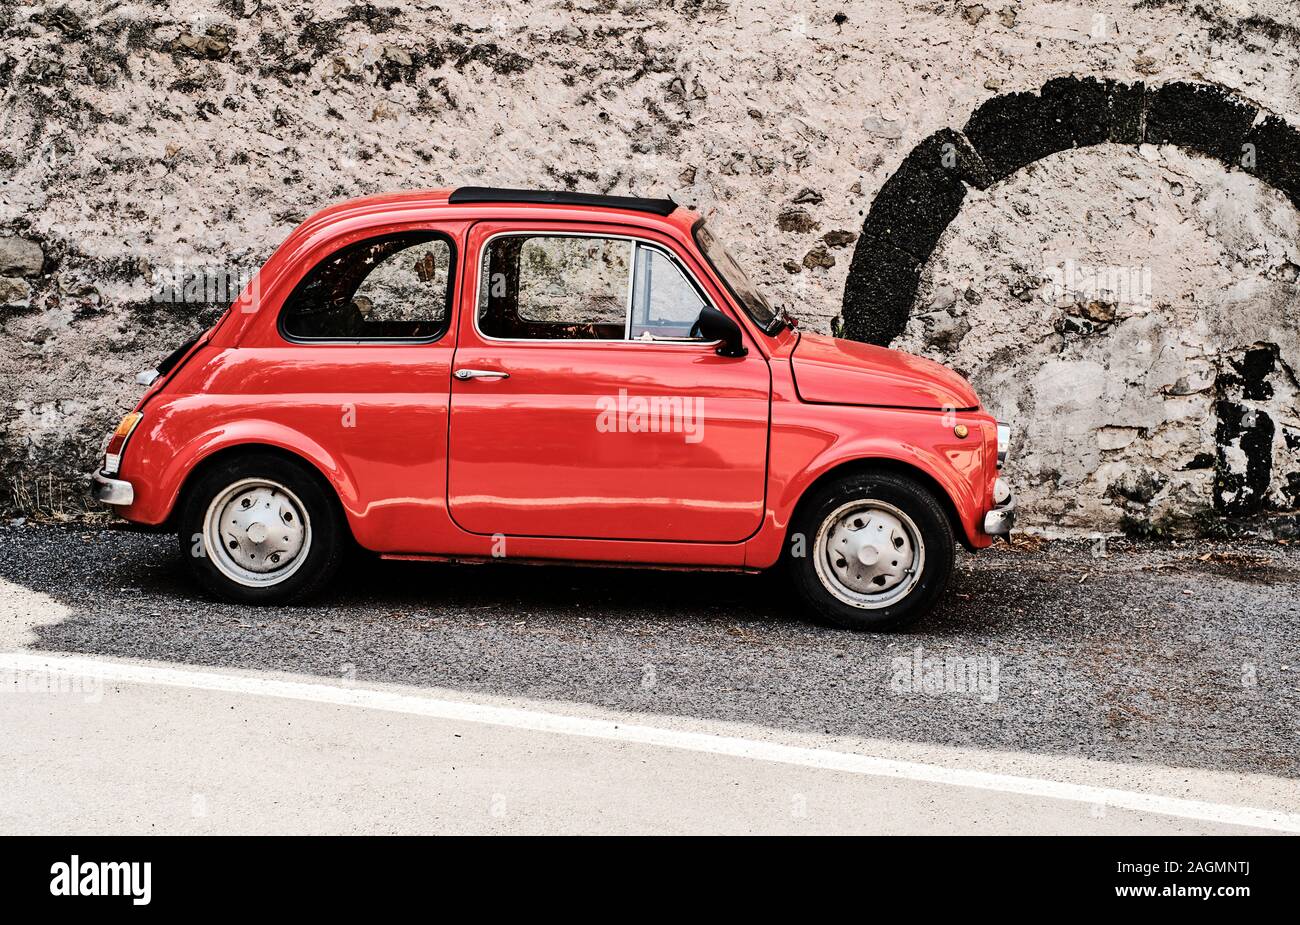 A bright red classic Fiat Cinque Cento / Fiat 500 parked in a street in Italy Stock Photo